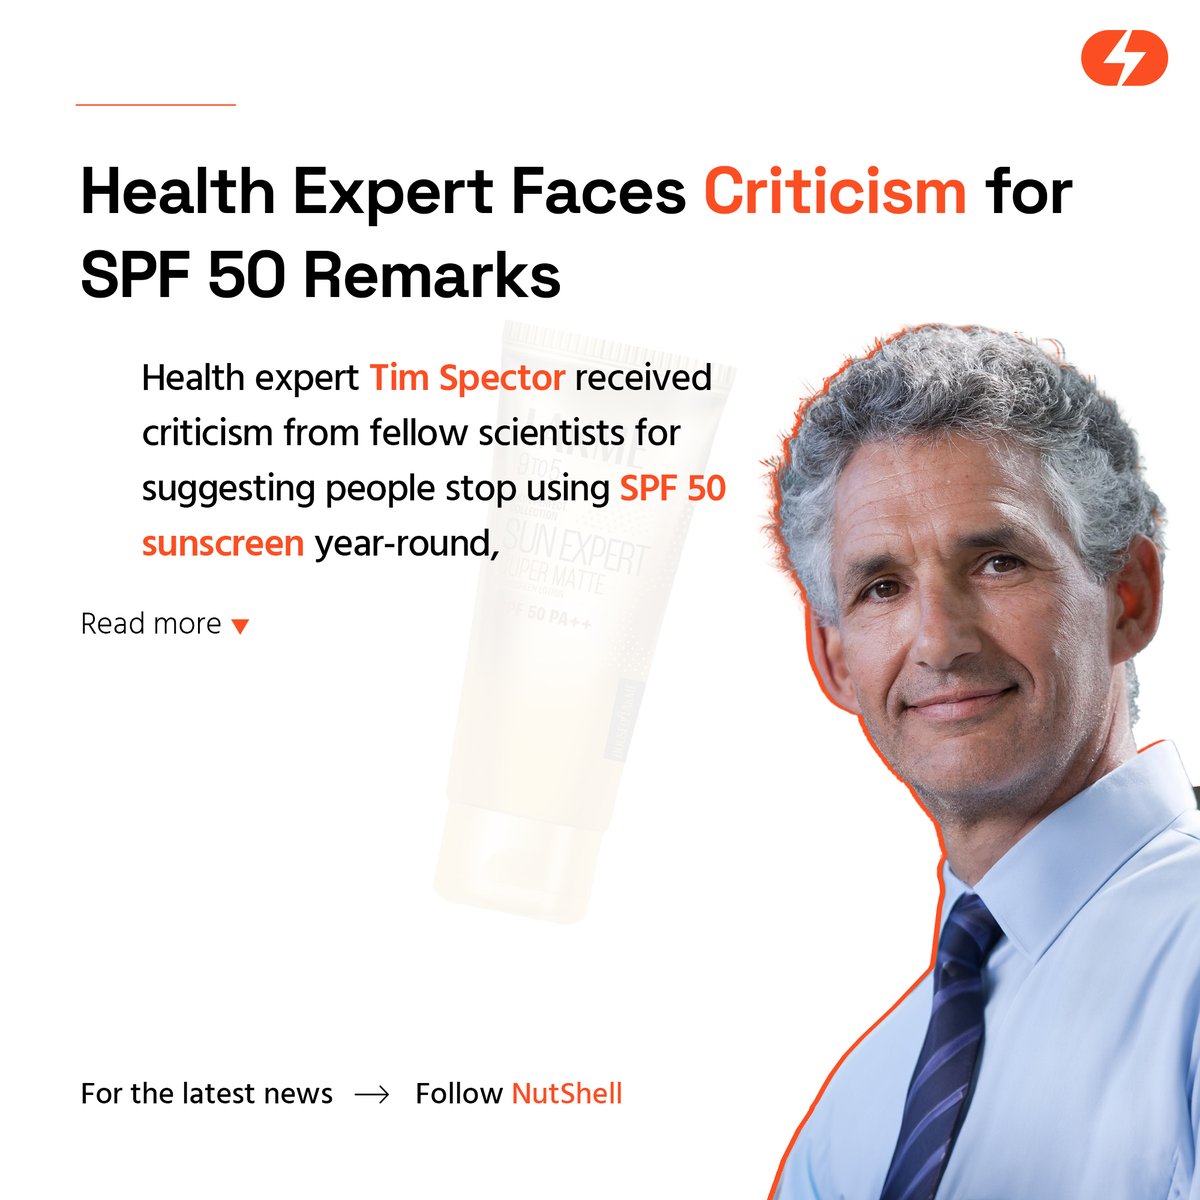 #Healthexpert Tim Spector received criticism from fellow scientists for suggesting people stop using #SPF50sunscreen year-round, based on a mouse study linking #vitaminD to #cancerimmunity. Critics argued the study's applicability to humans